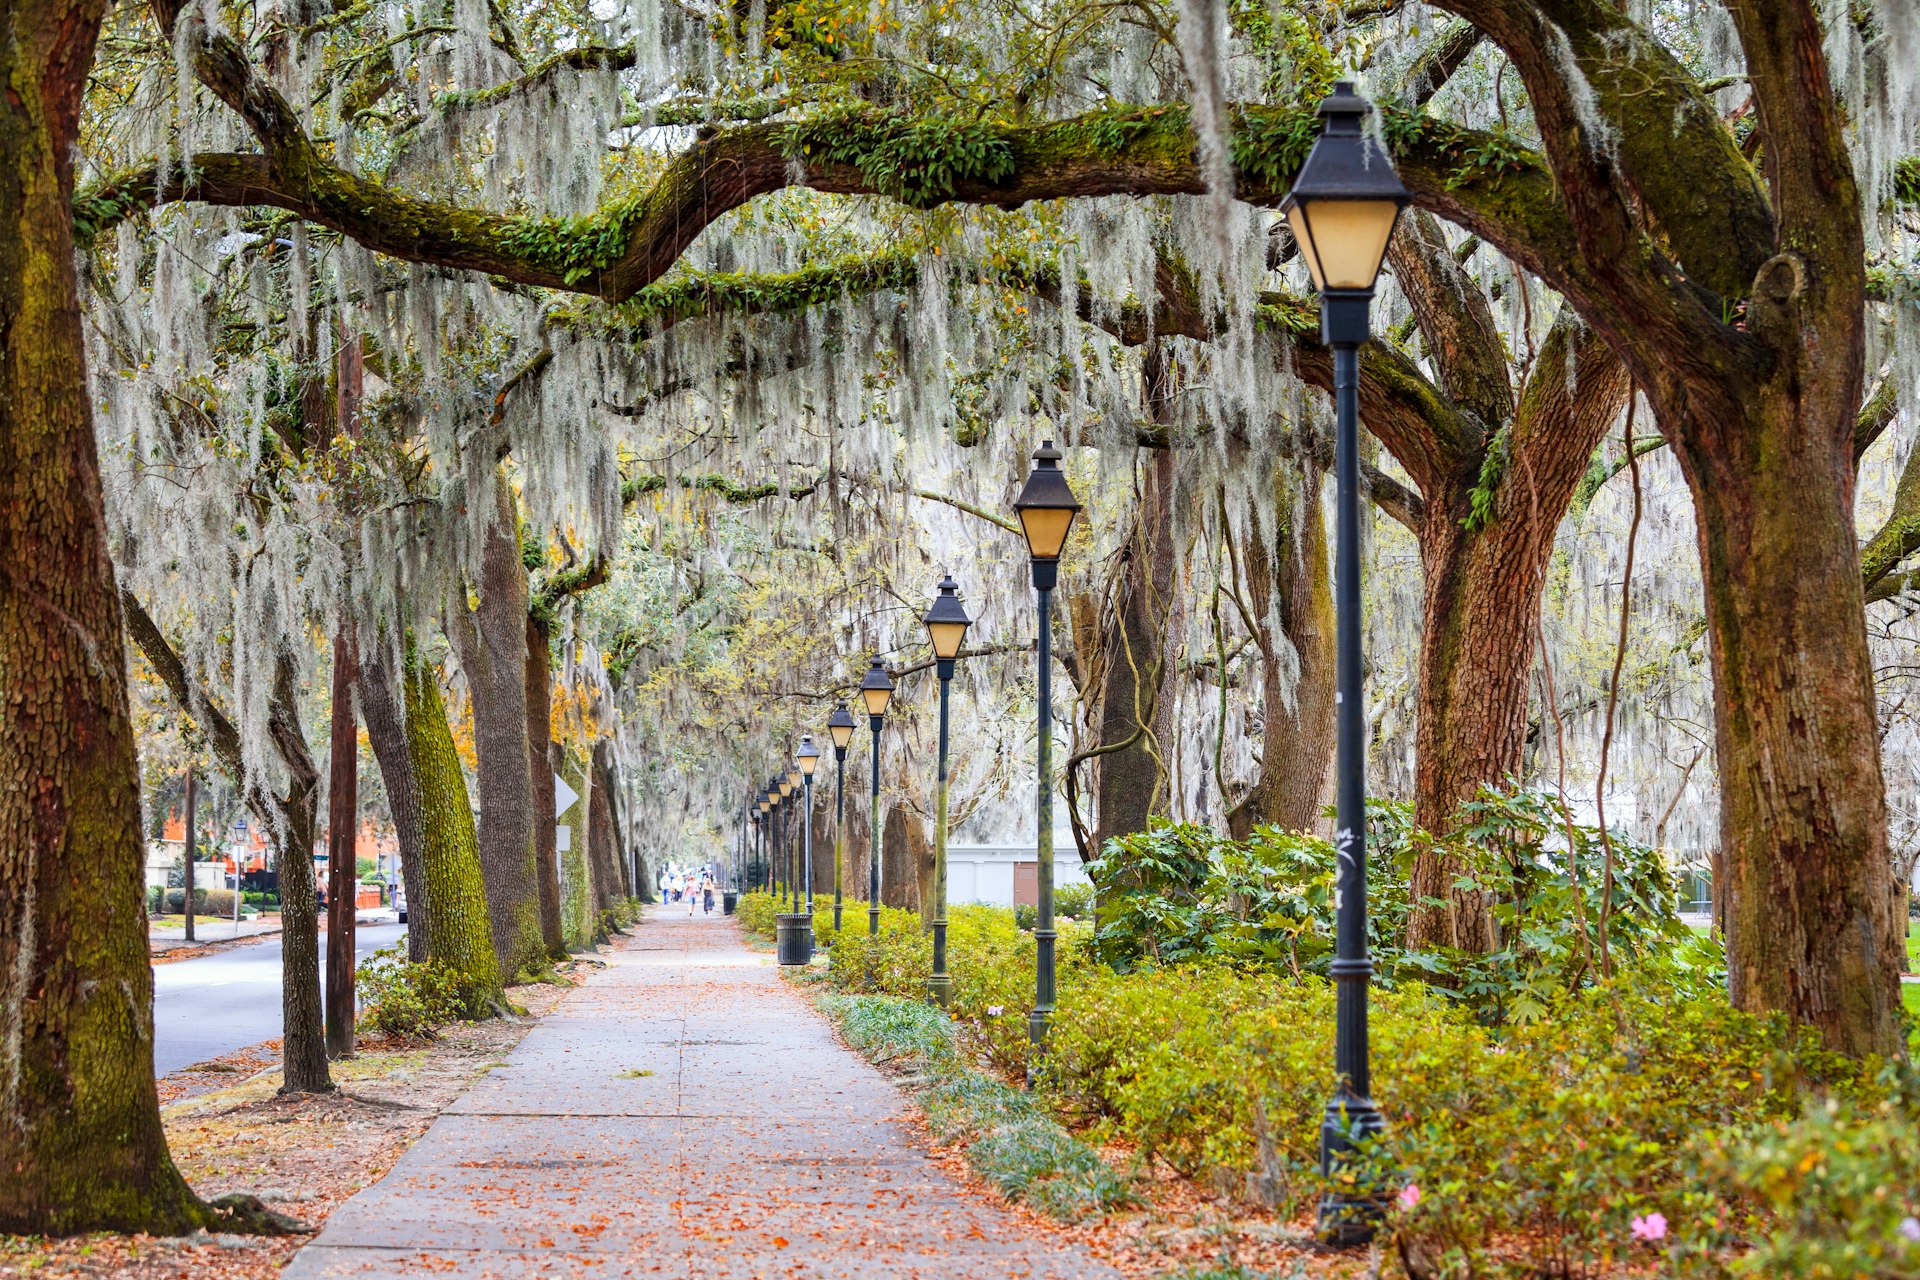 A sidewalk lined with old-fashiond lampposts is sheltered by Spanish moss drooping from the trees above